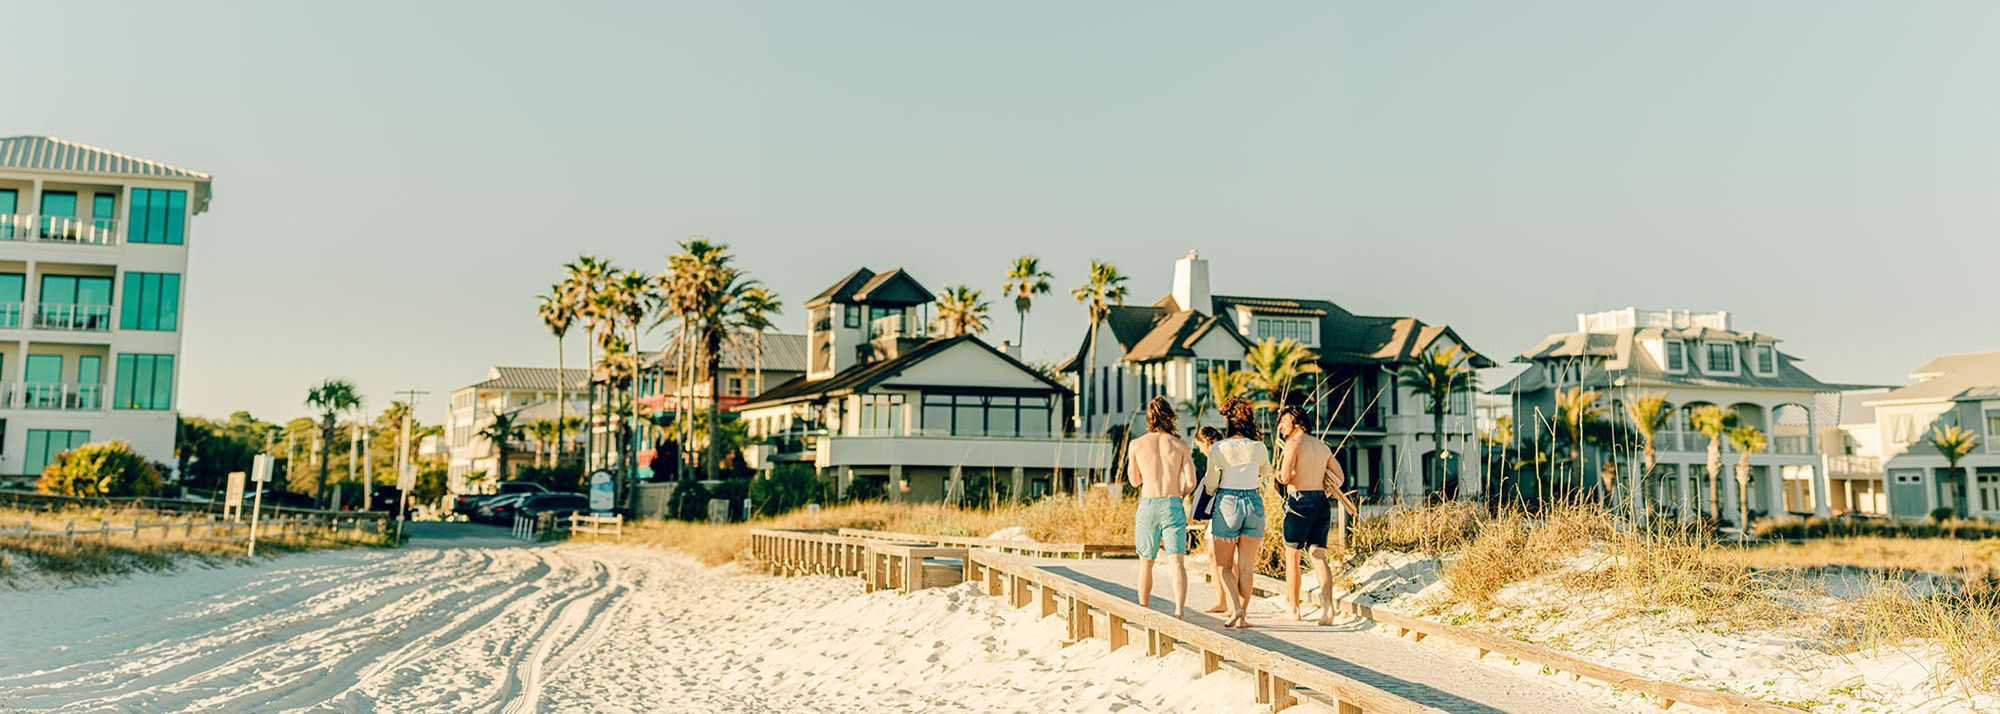 Friends walking back from the beach to their vacation home on the Emerald Coast